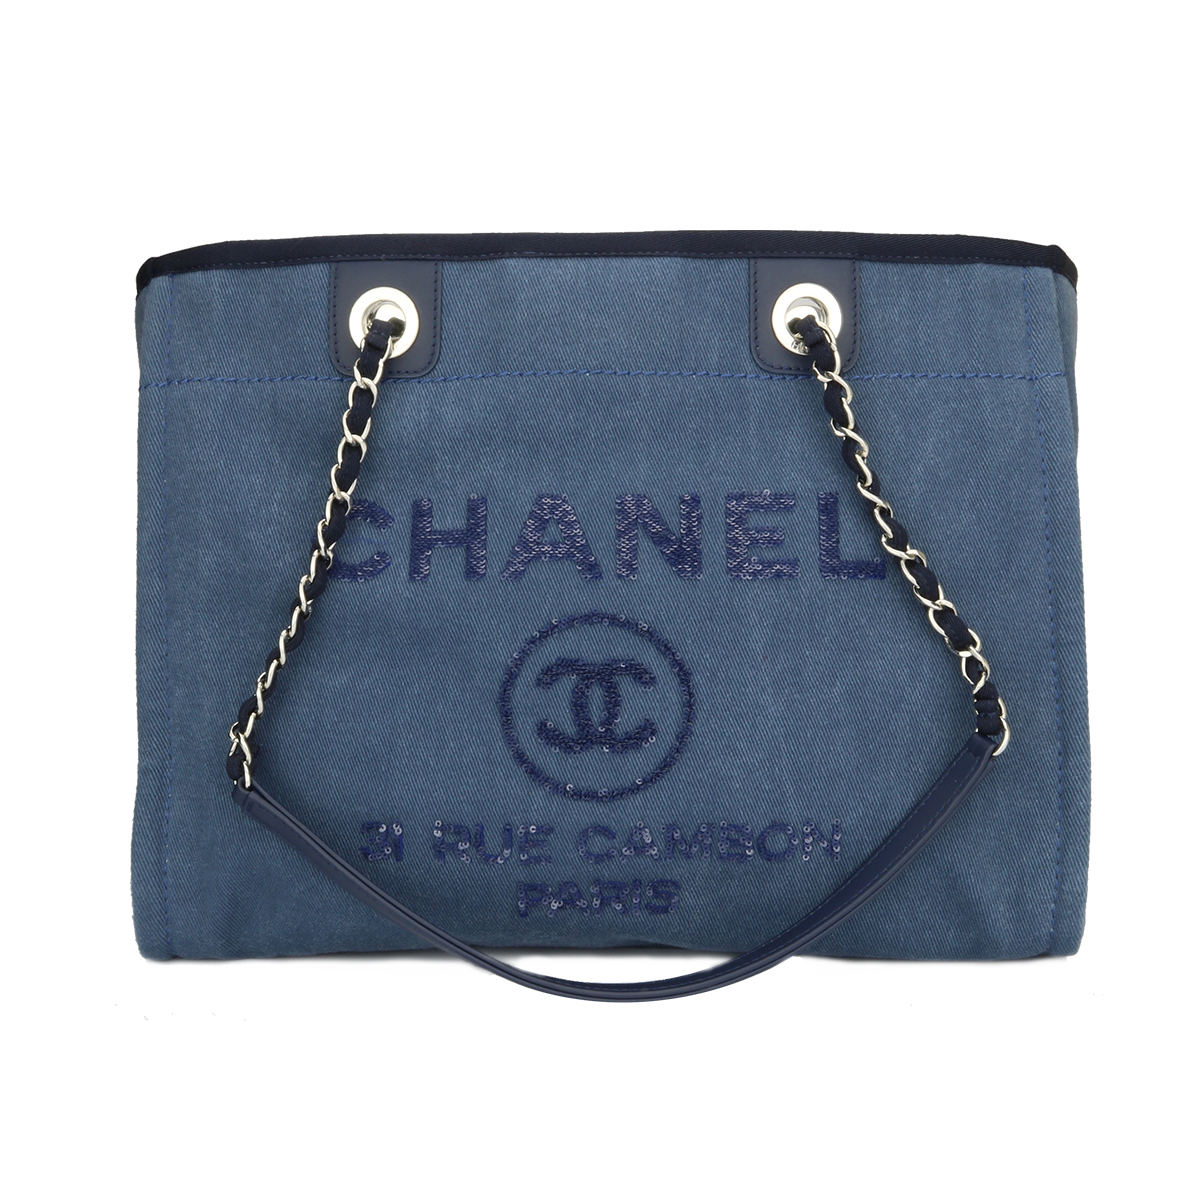 blue chanel tote deauville